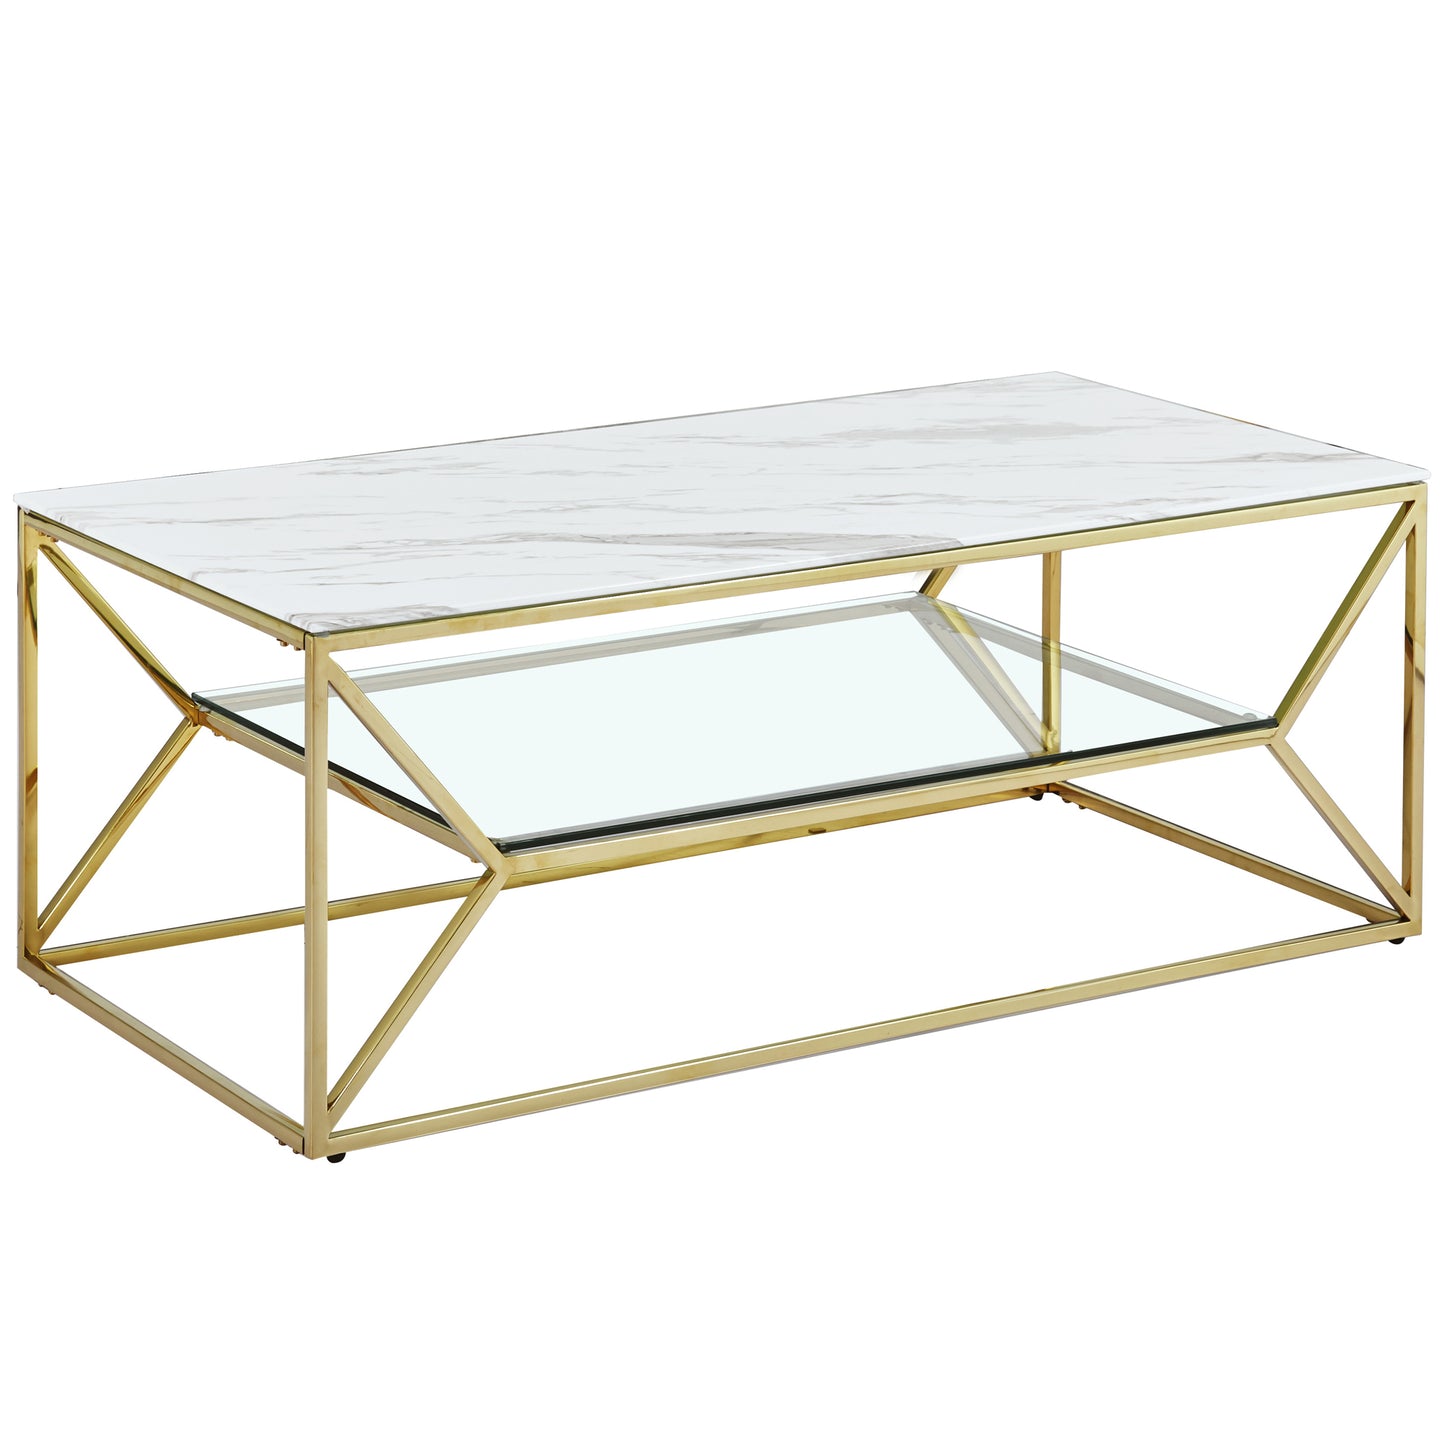 Ava White Marble Effect Coffee Table With Gold Legs